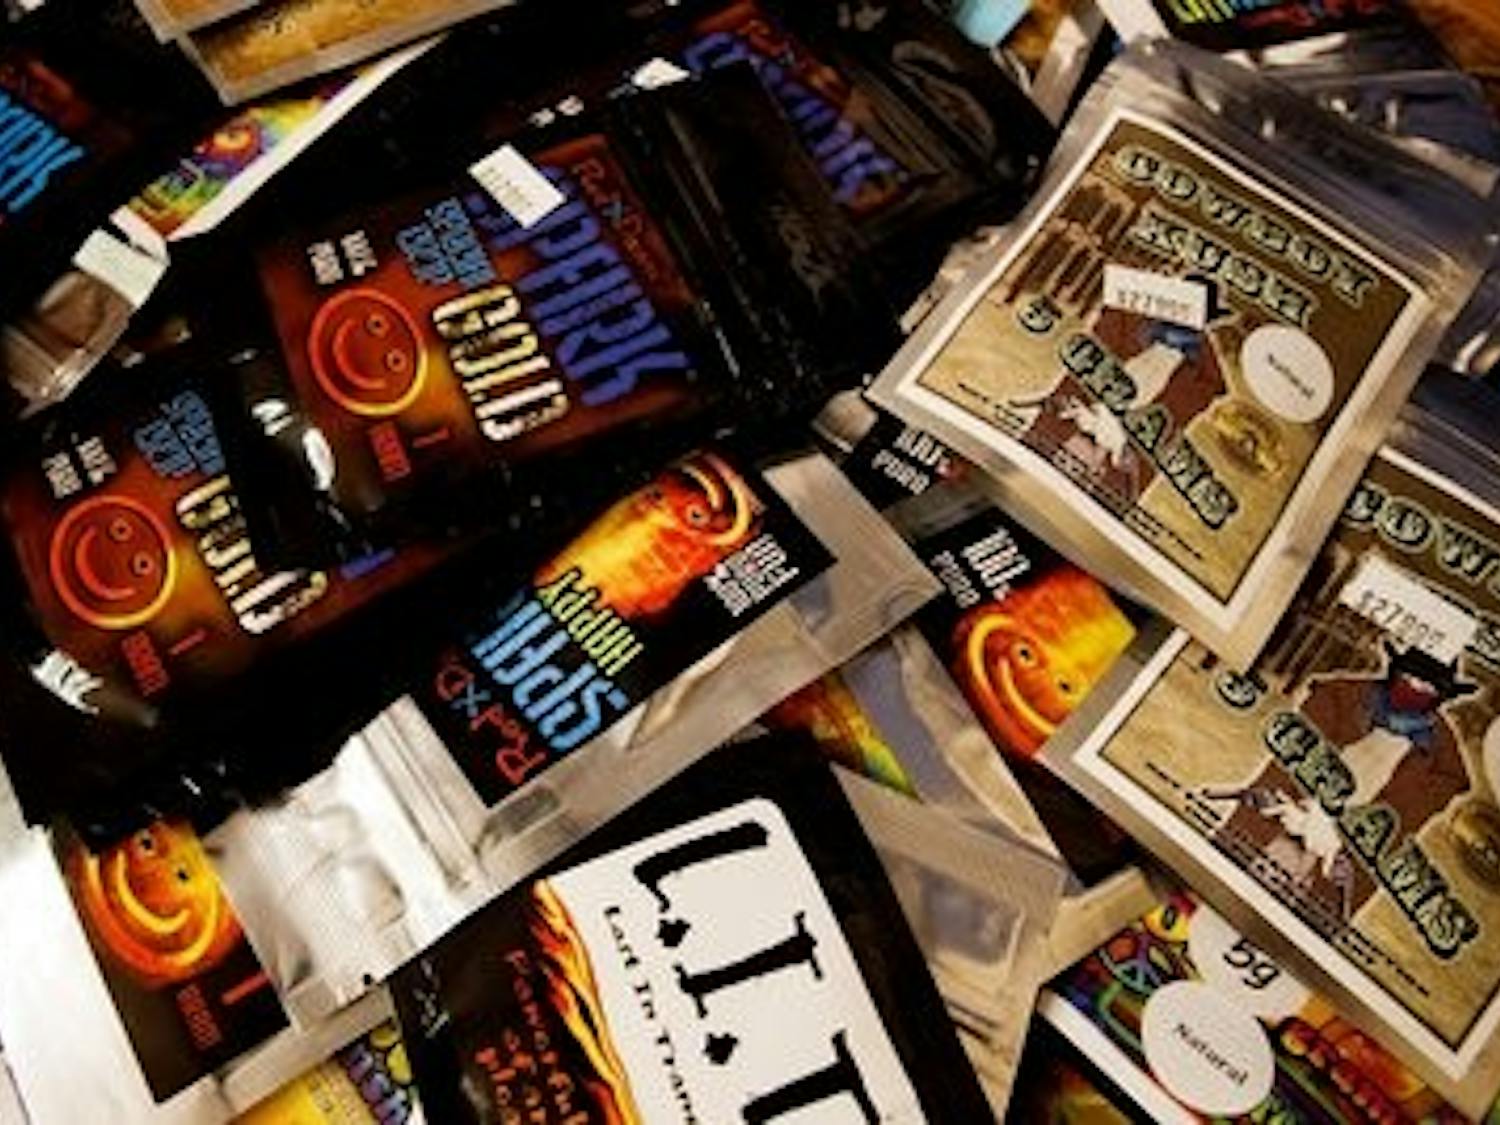 Synthetic marijuana, also known as "spice" or "K2," has recently drawn attention and been seized by the state. (CONTRIBUTED)